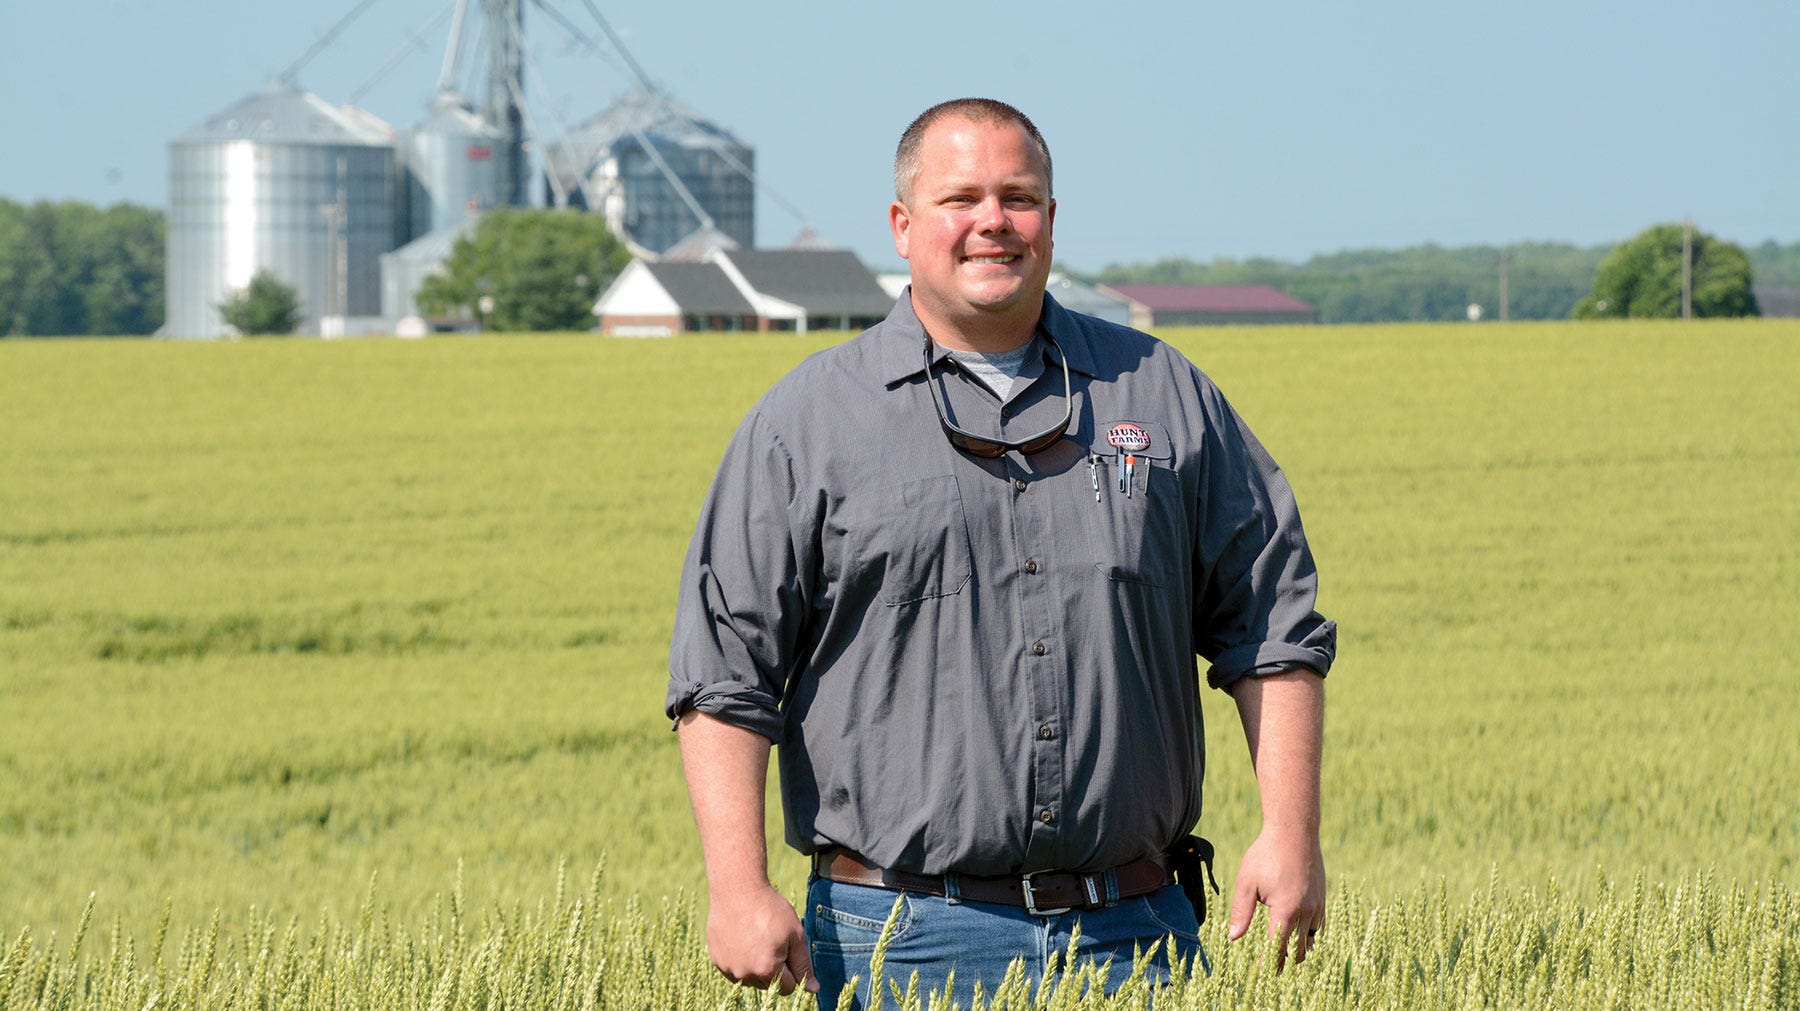 Farmer standing in wheat field with grain setup in background.